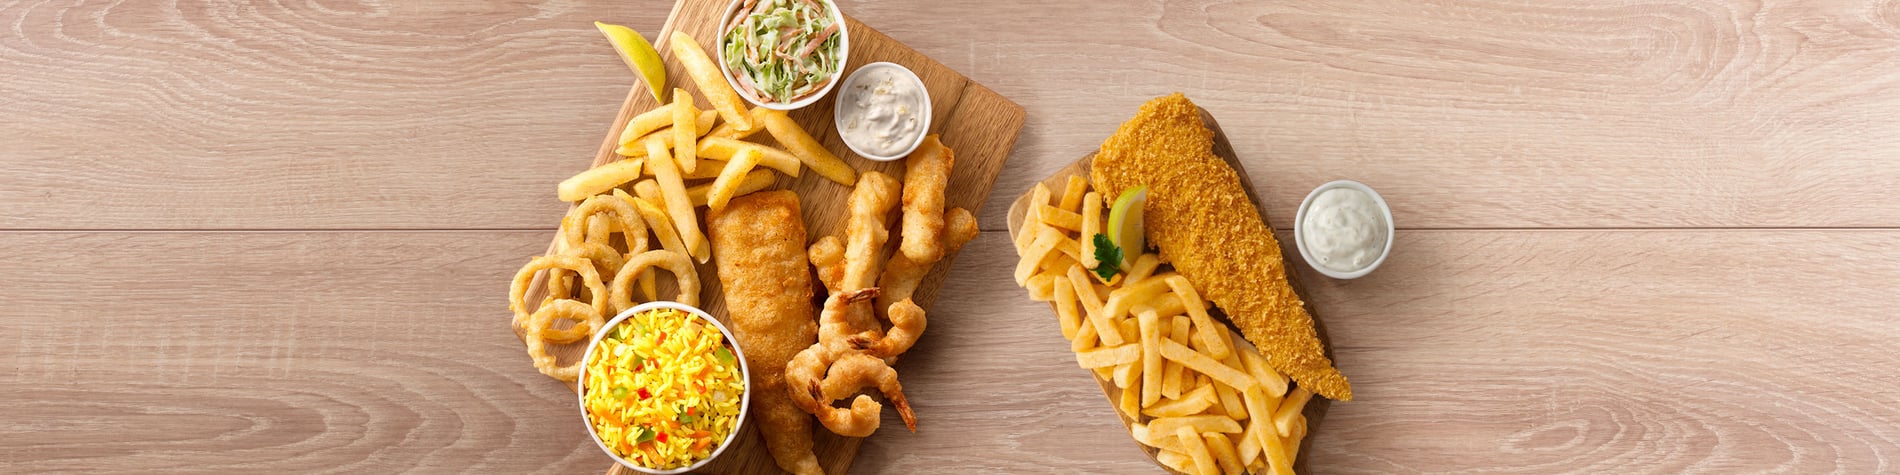 Seafood meals from Fishaways Nelspruit Crossing including a Crunchy Fish and Chips meal and a seafood Platter for One with hake, calamari, prawns, chips, onion rings, and coleslaw.